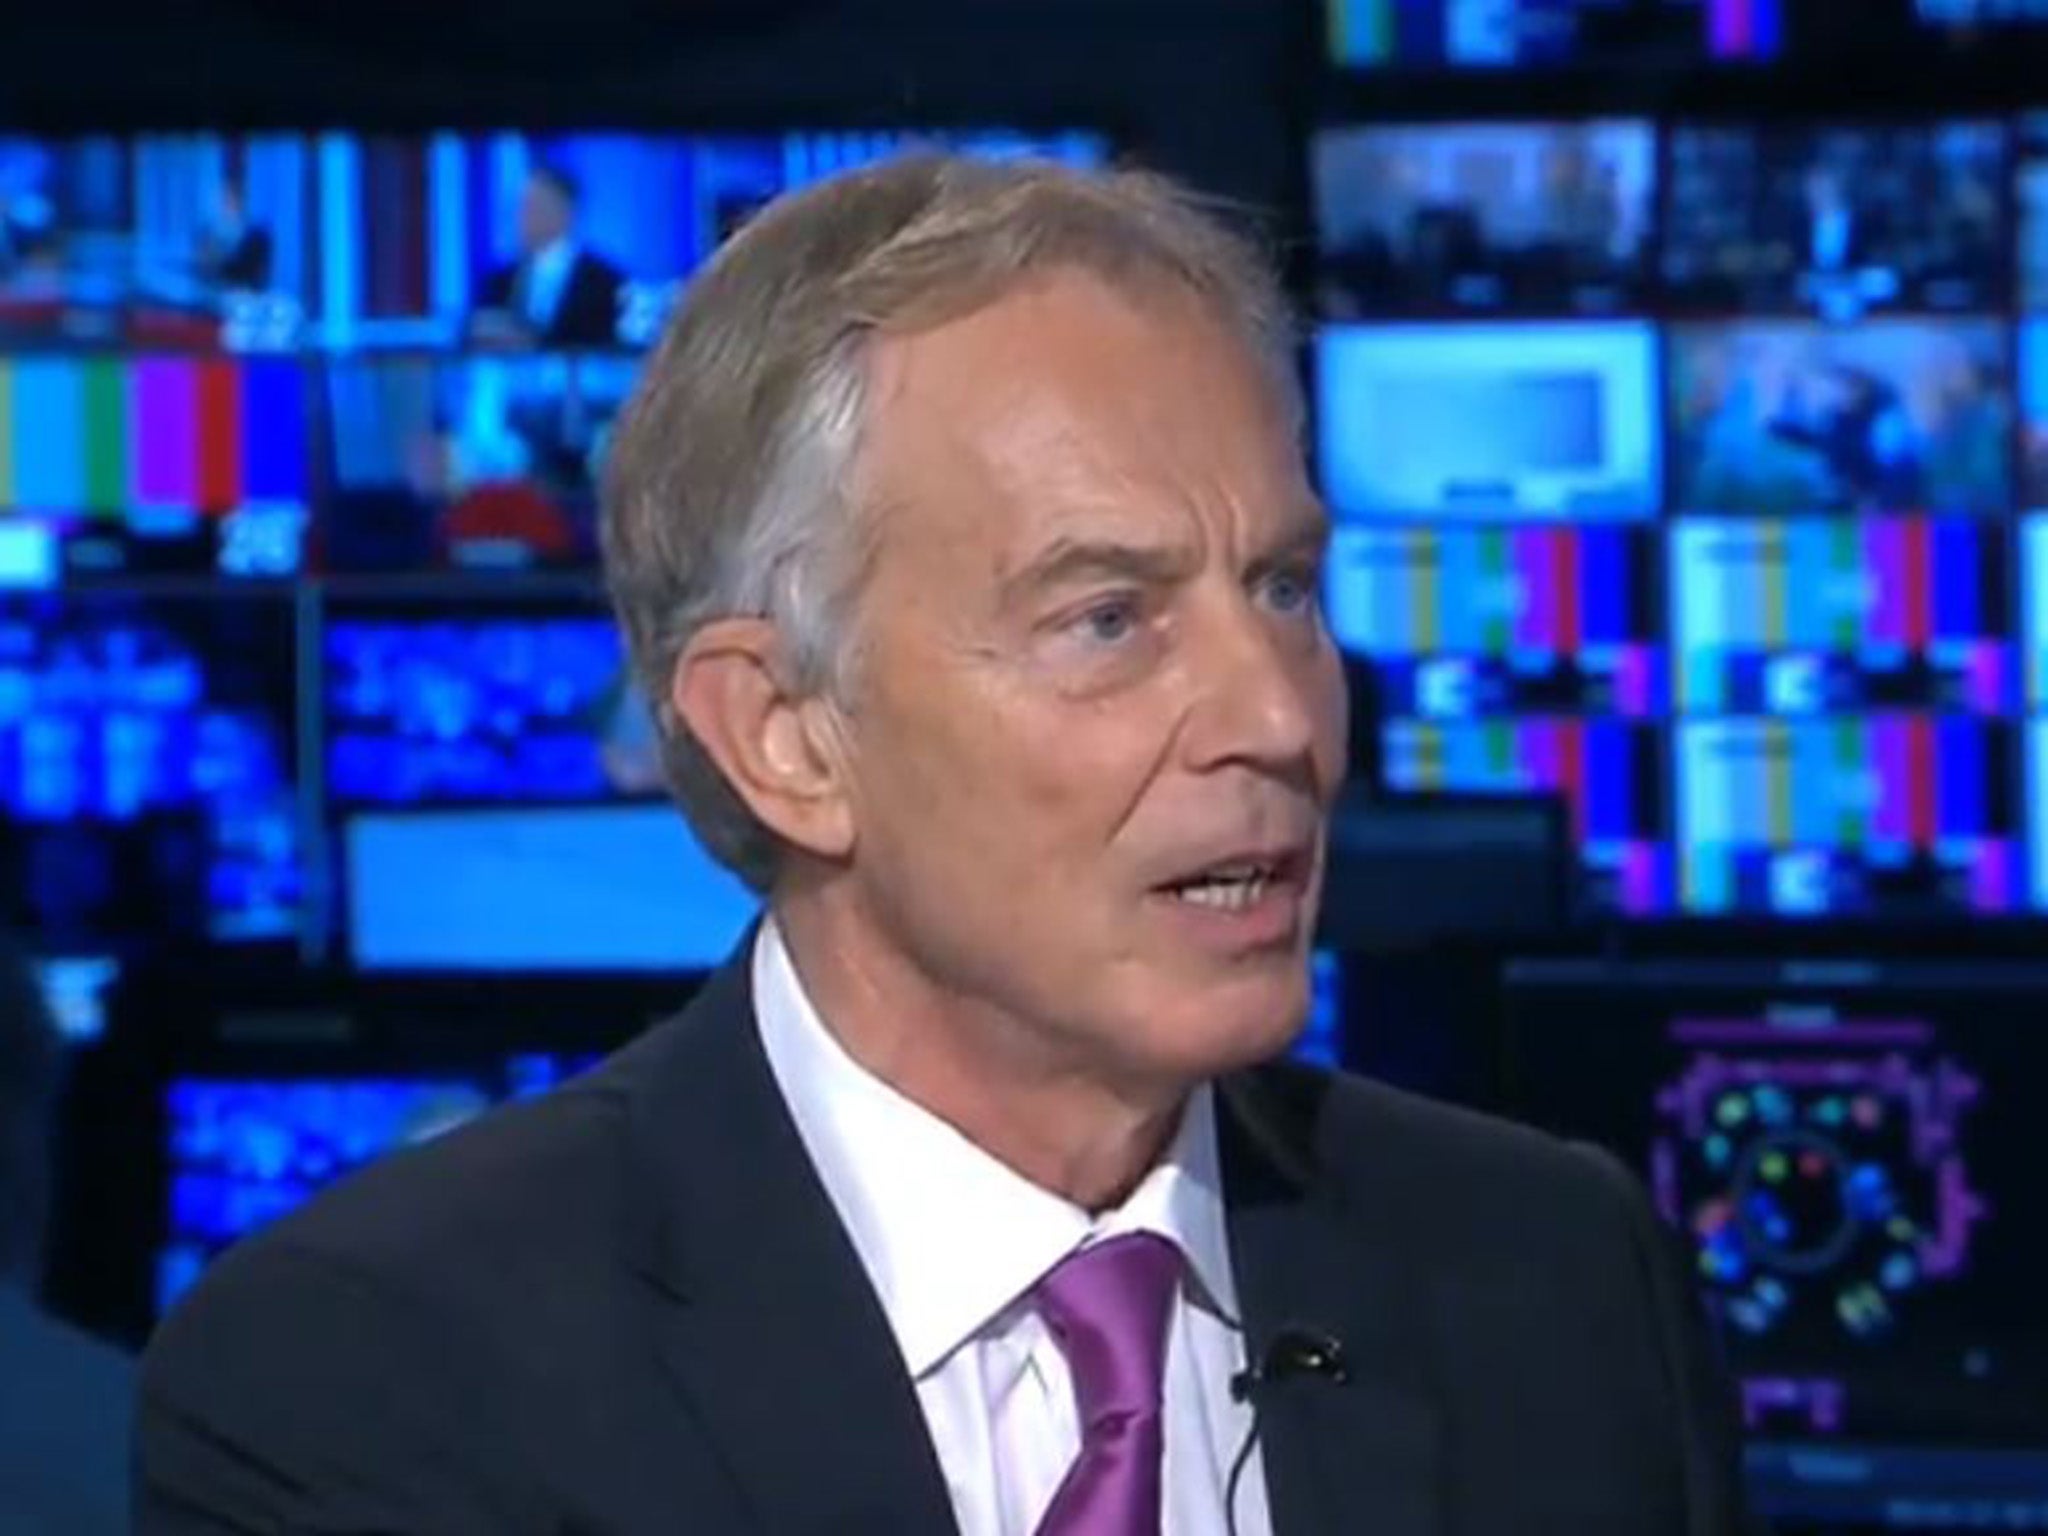 Tony Blair has said he will wait to see the findings of the Chilcot report before commenting